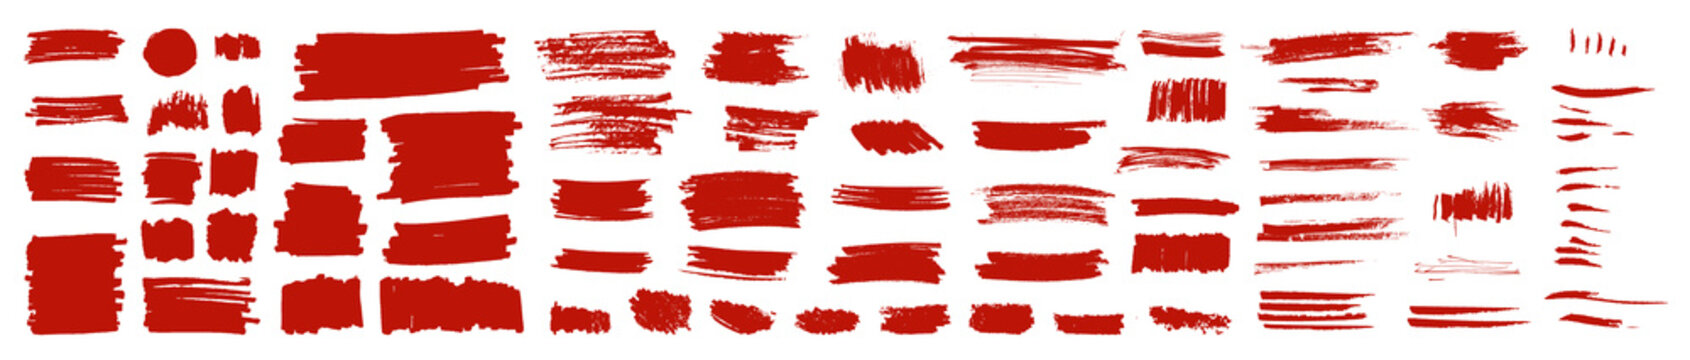 Grungy vector red color brush paint stroke frames. Rough ink blot shape scribble frames . Punk dirty splash brushstroke background textures. High definition trace brush stroke elements. Abstract art